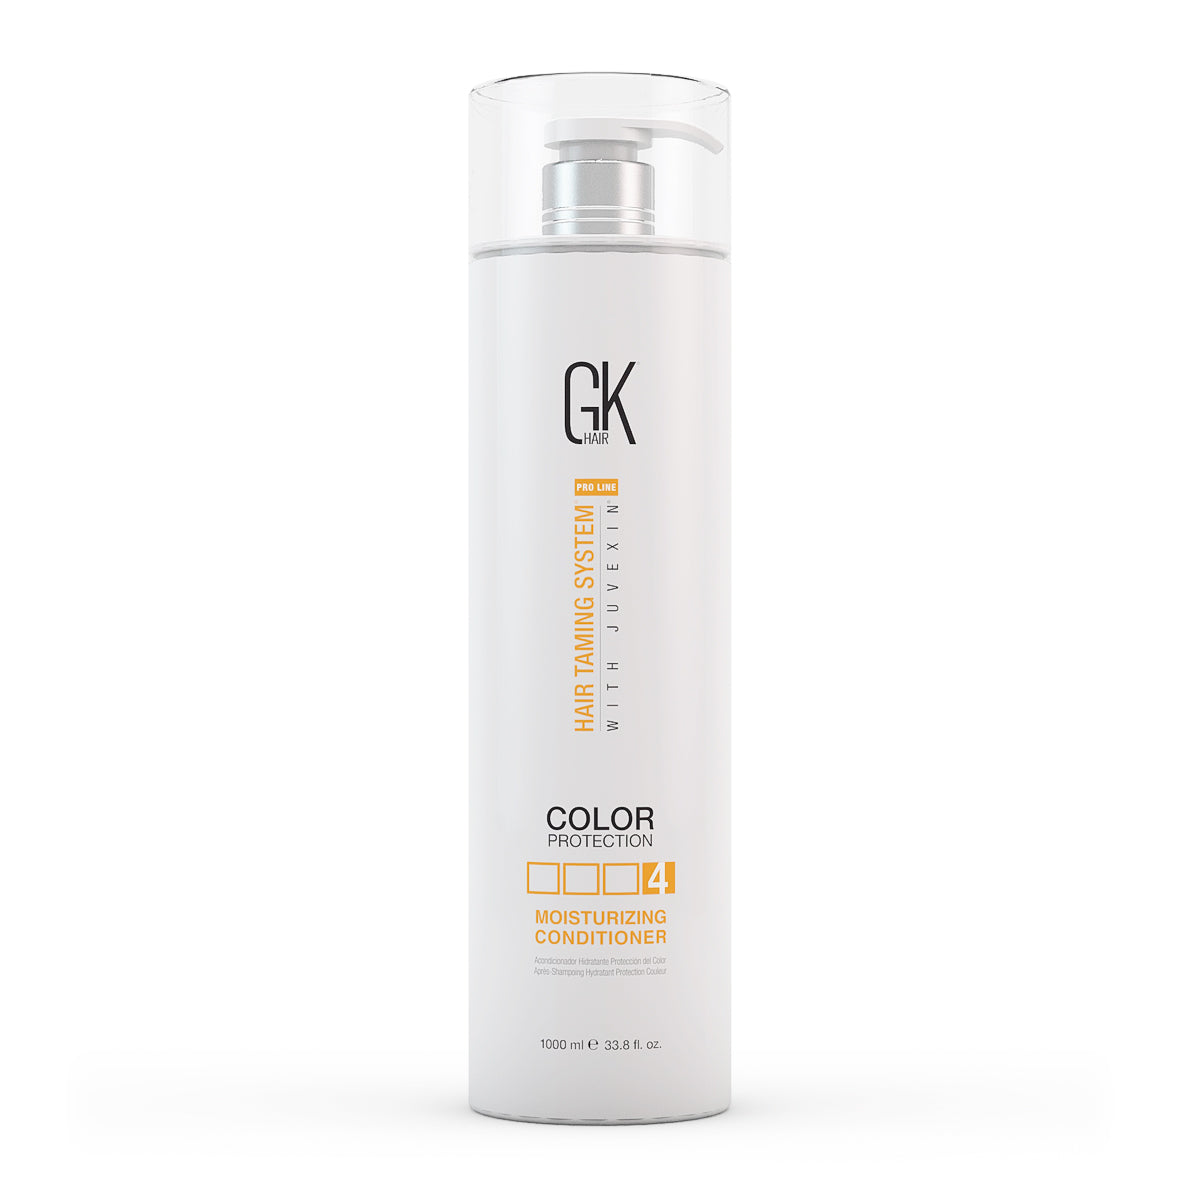 GK Hair Moisturizing Color Protection Conditioner 1000ml